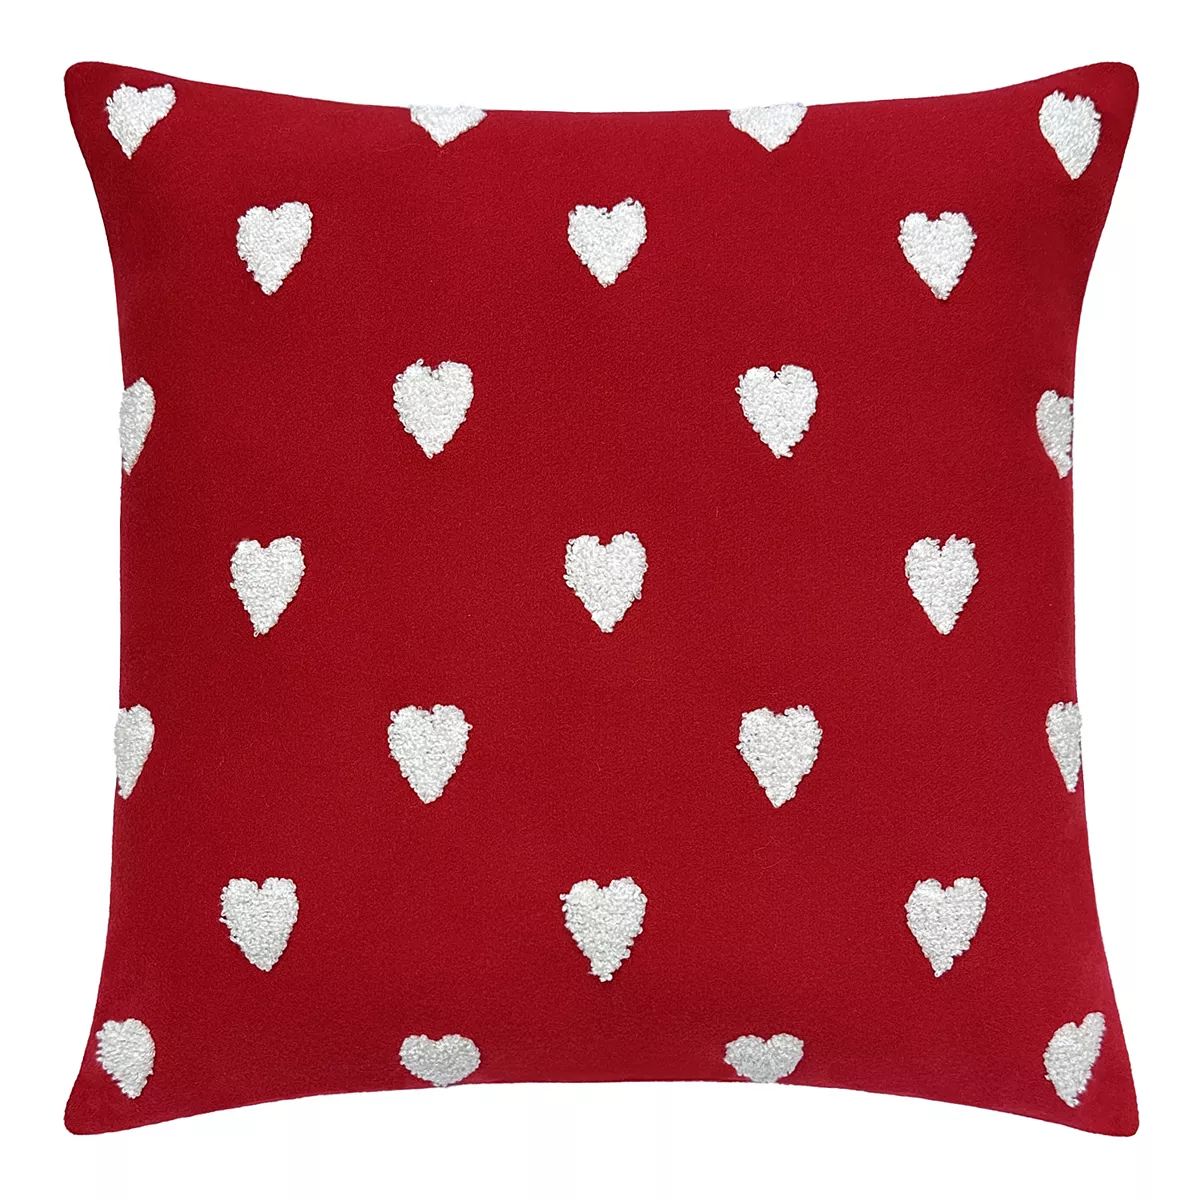 Celebrate Together Valentine's Day Red And White Hearts Pillow | Kohl's